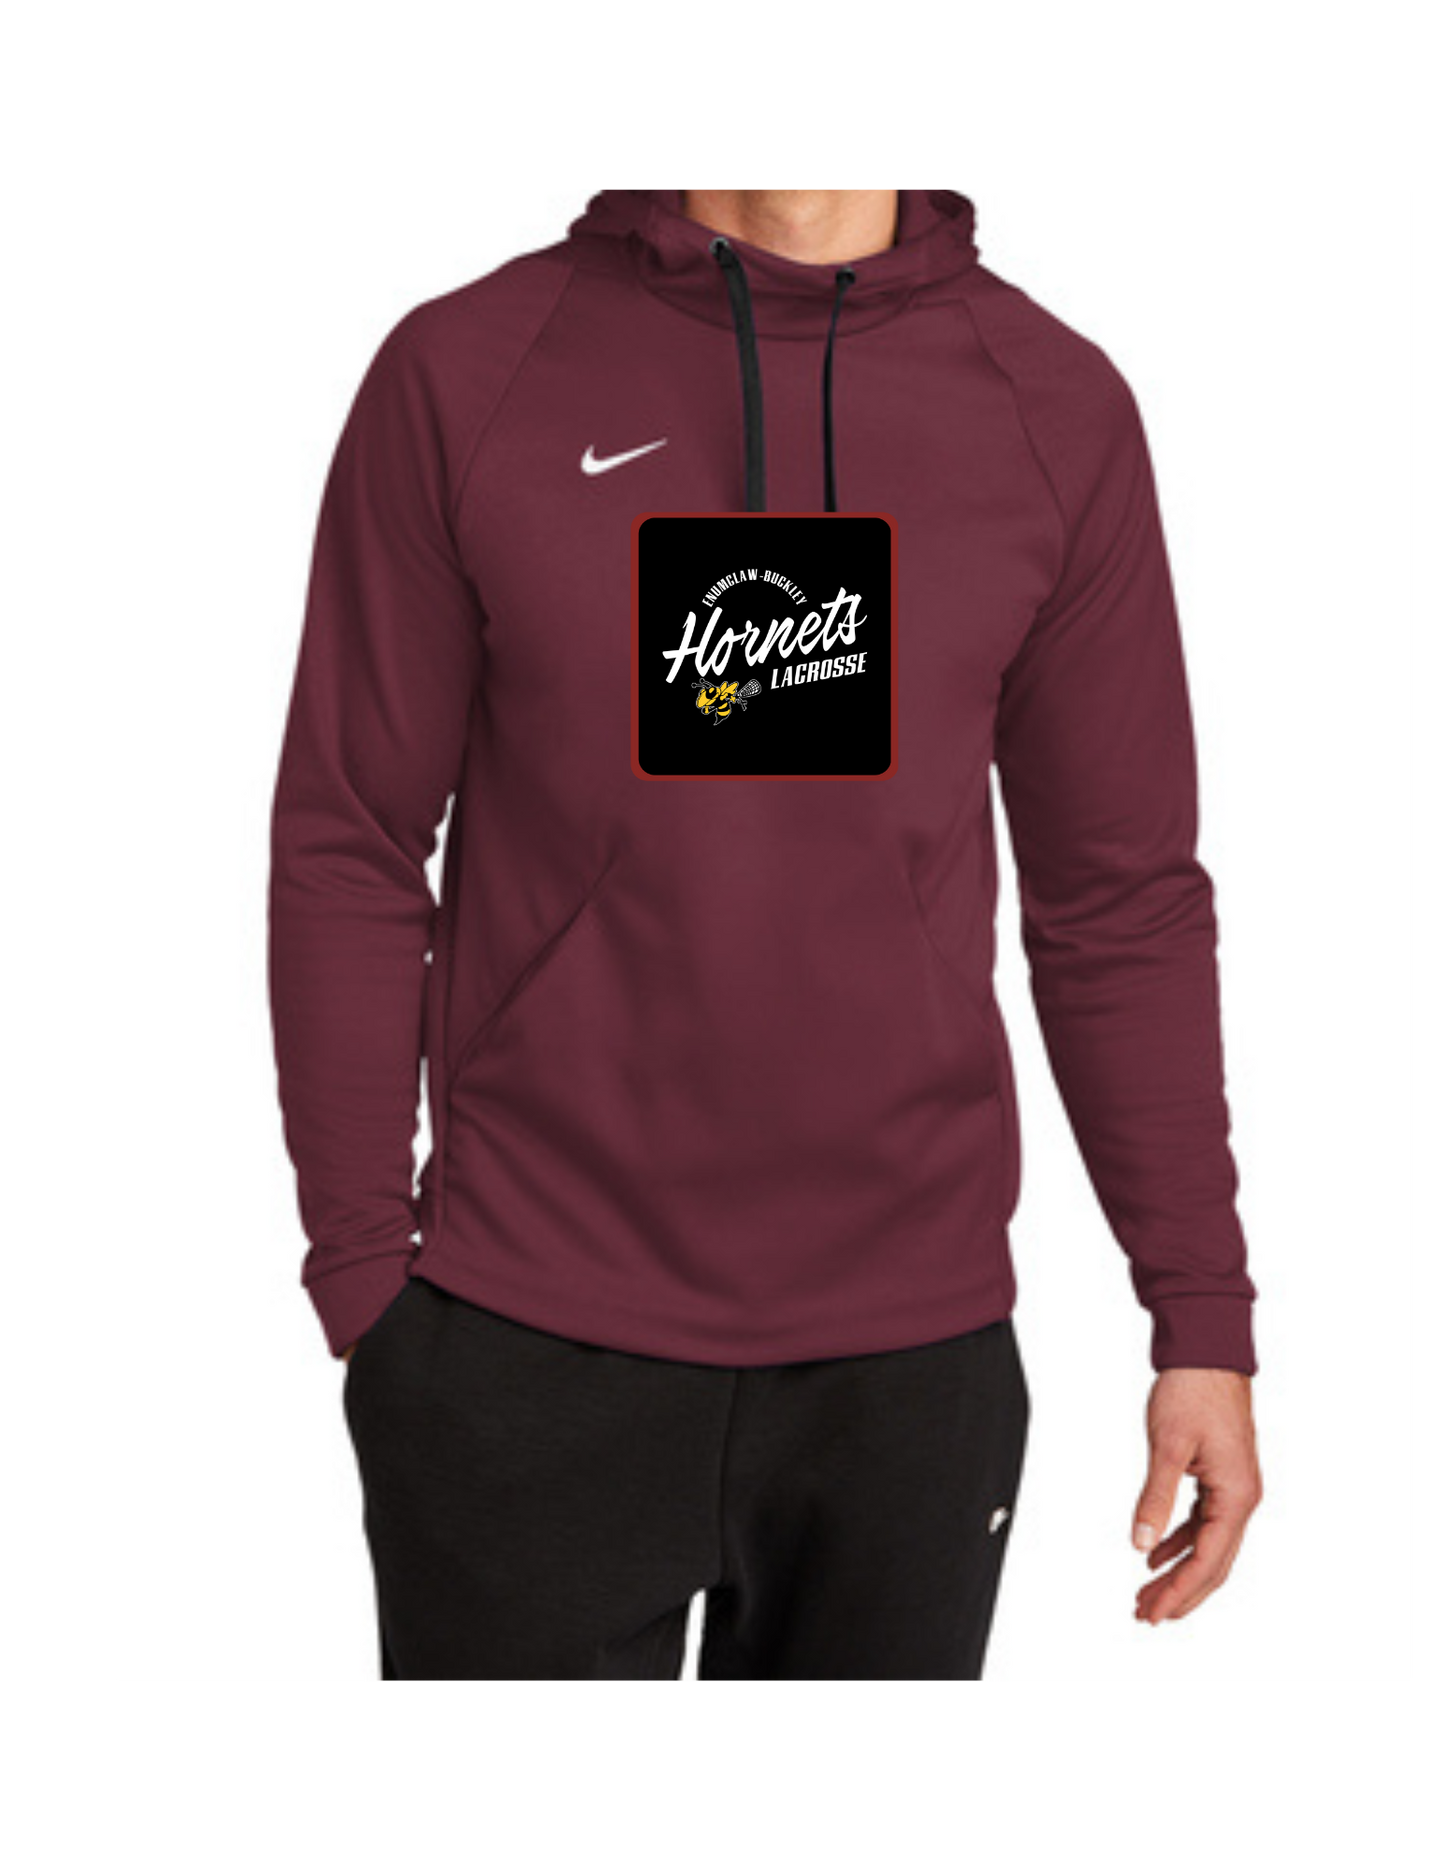 Hornets Lacrosse Classic Logo Nike Therma-FIT Pullover Fleece Hoodie